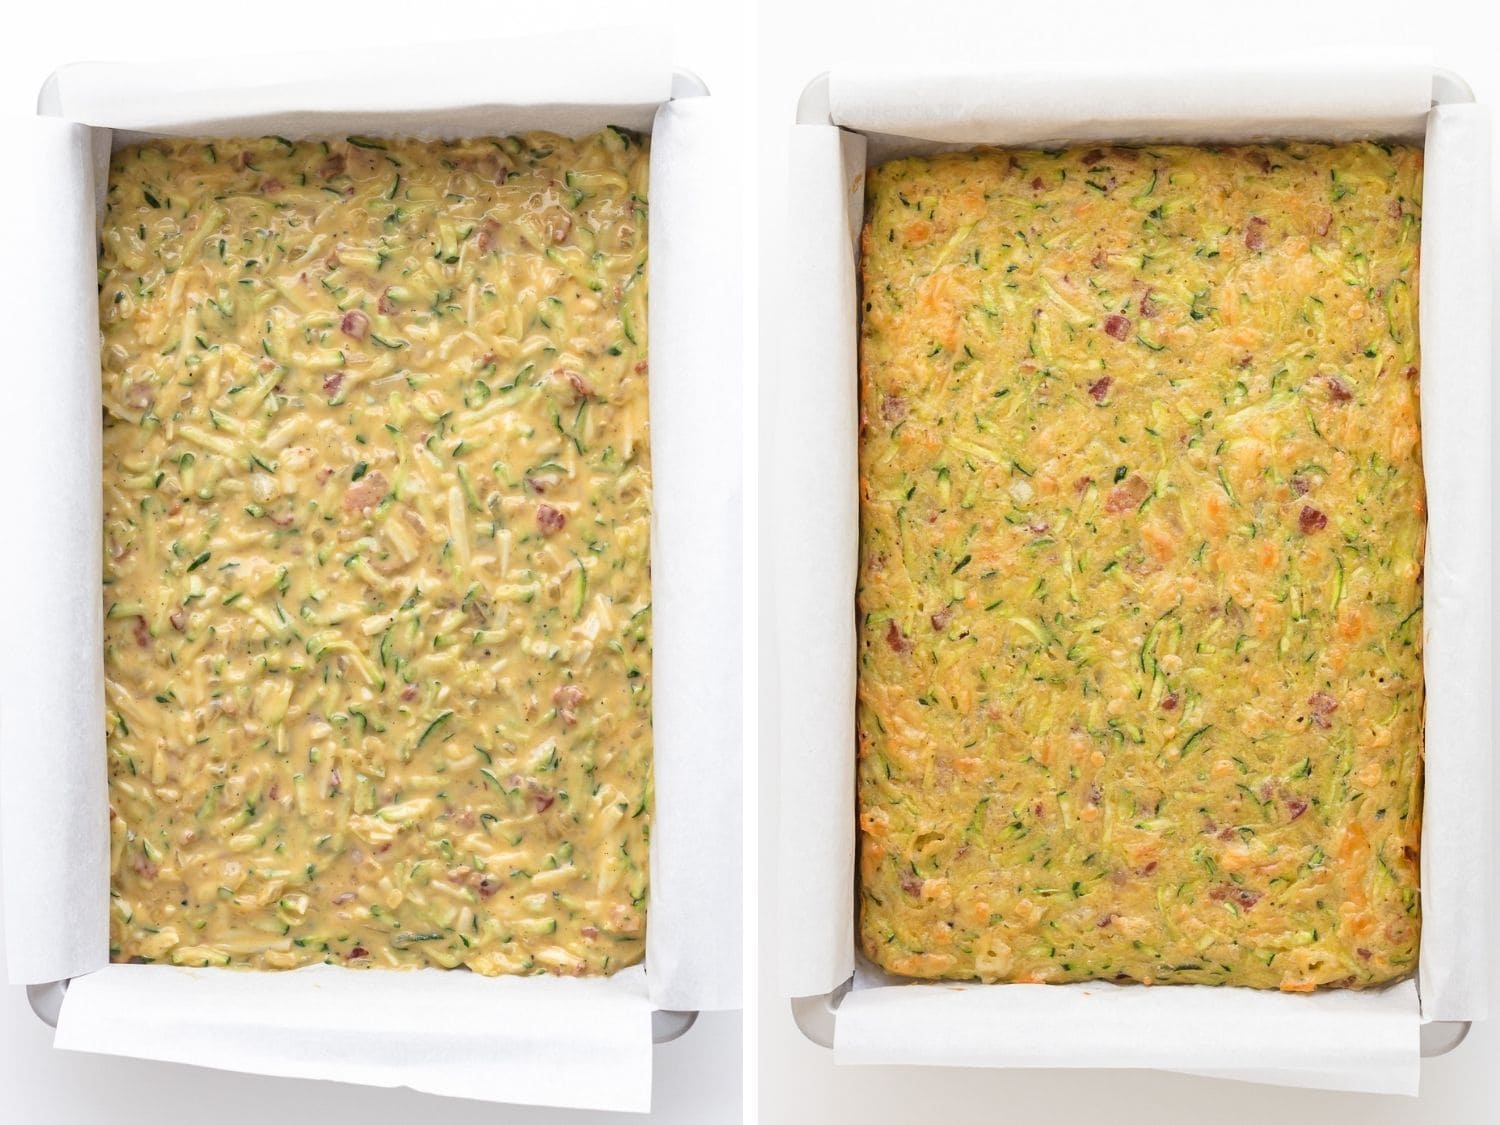 Collage of zucchini slice in baking pan before and after baking.